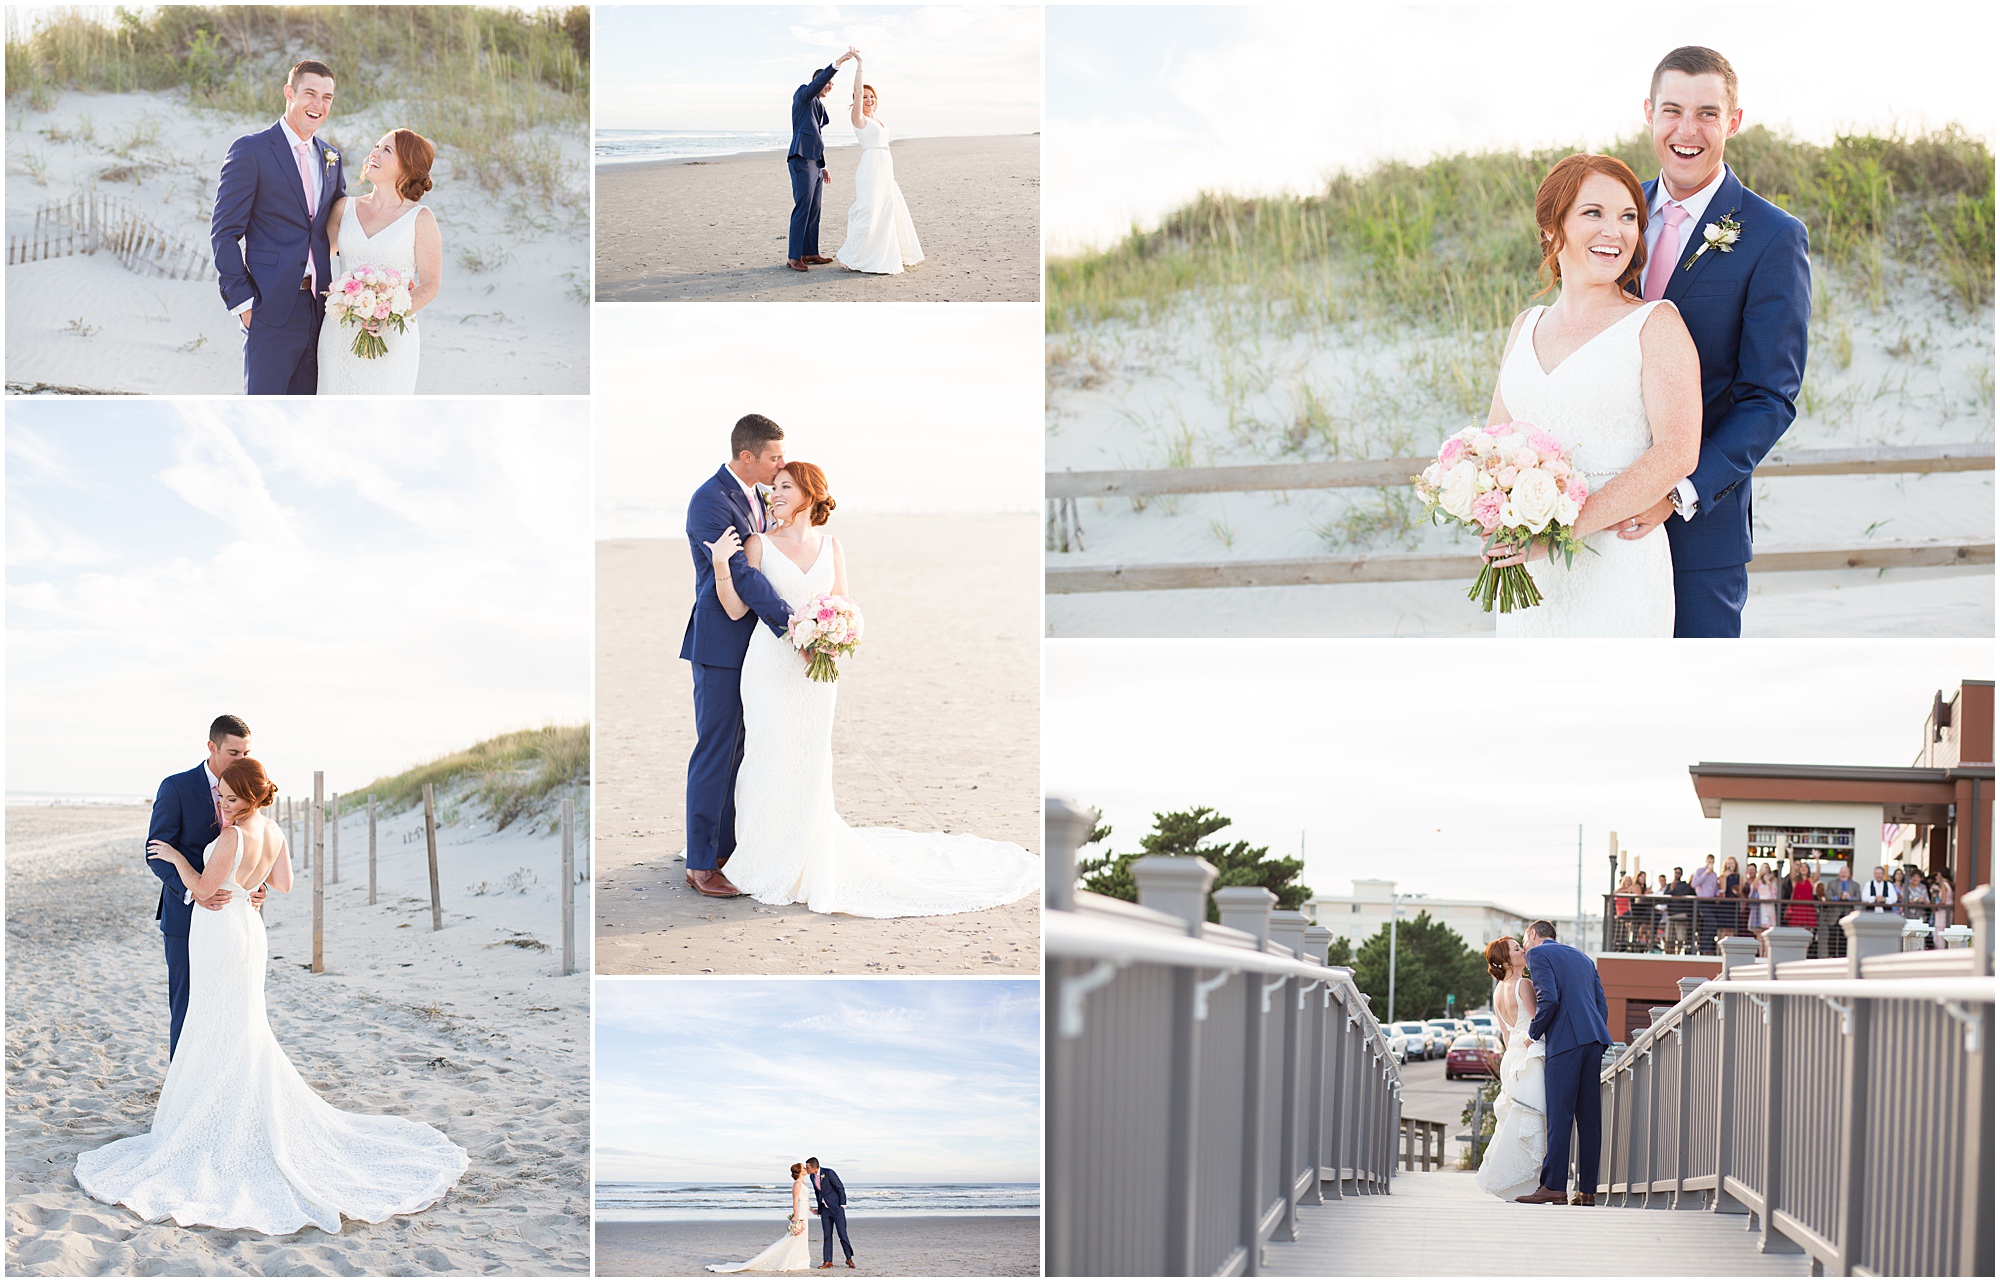 The Windrift Hotel in Avalon is one of the best Jersey Shore wedding venues